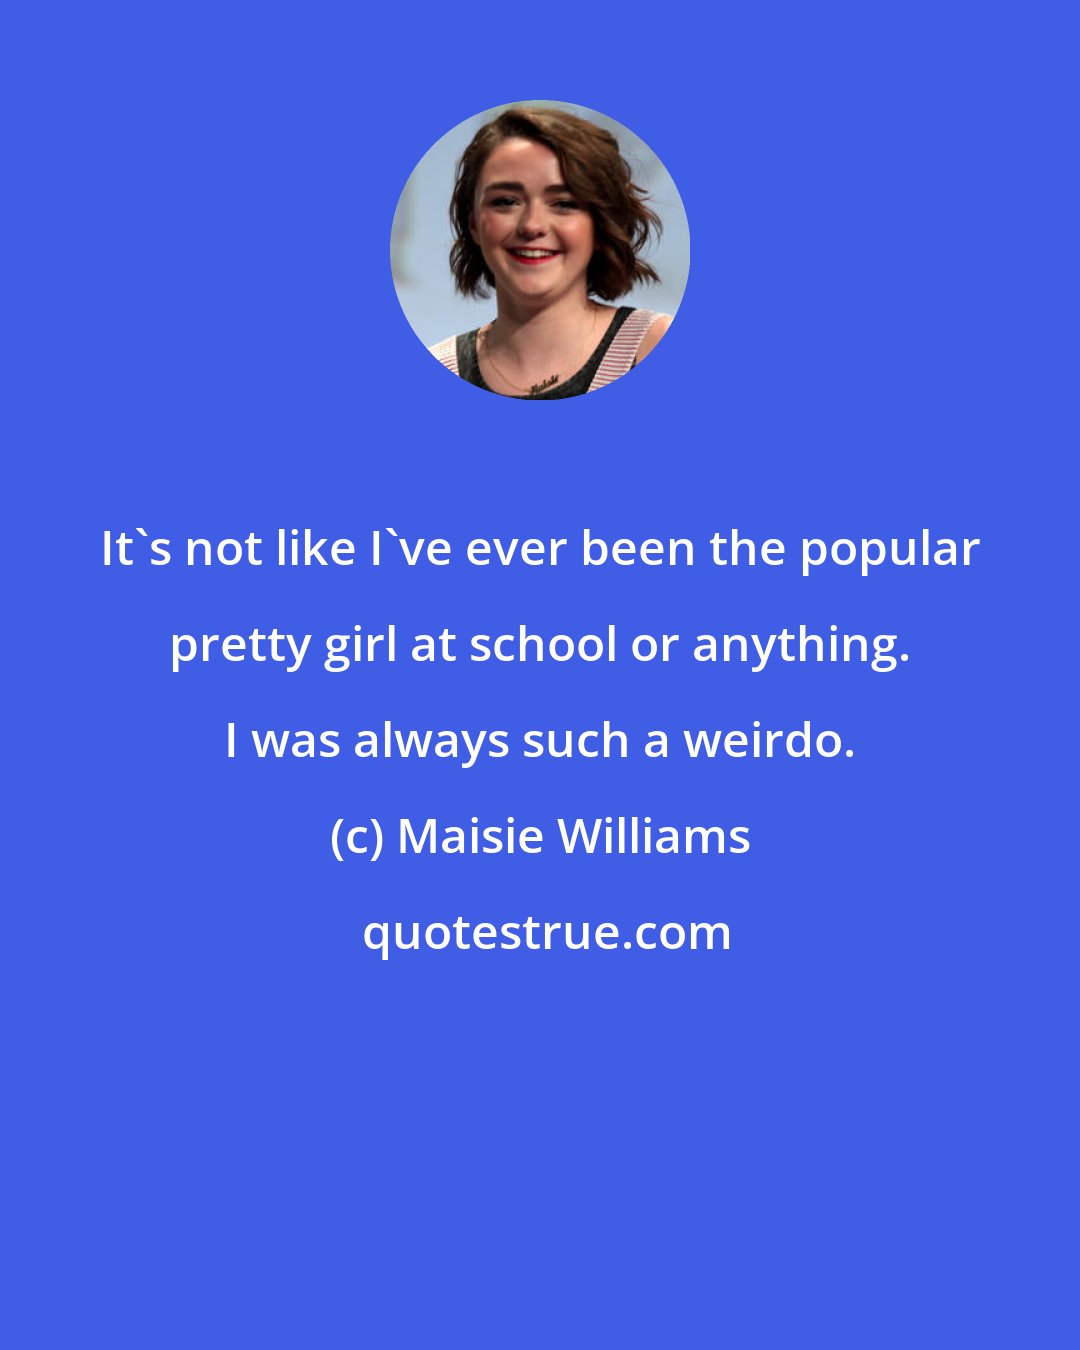 Maisie Williams: It's not like I've ever been the popular pretty girl at school or anything. I was always such a weirdo.